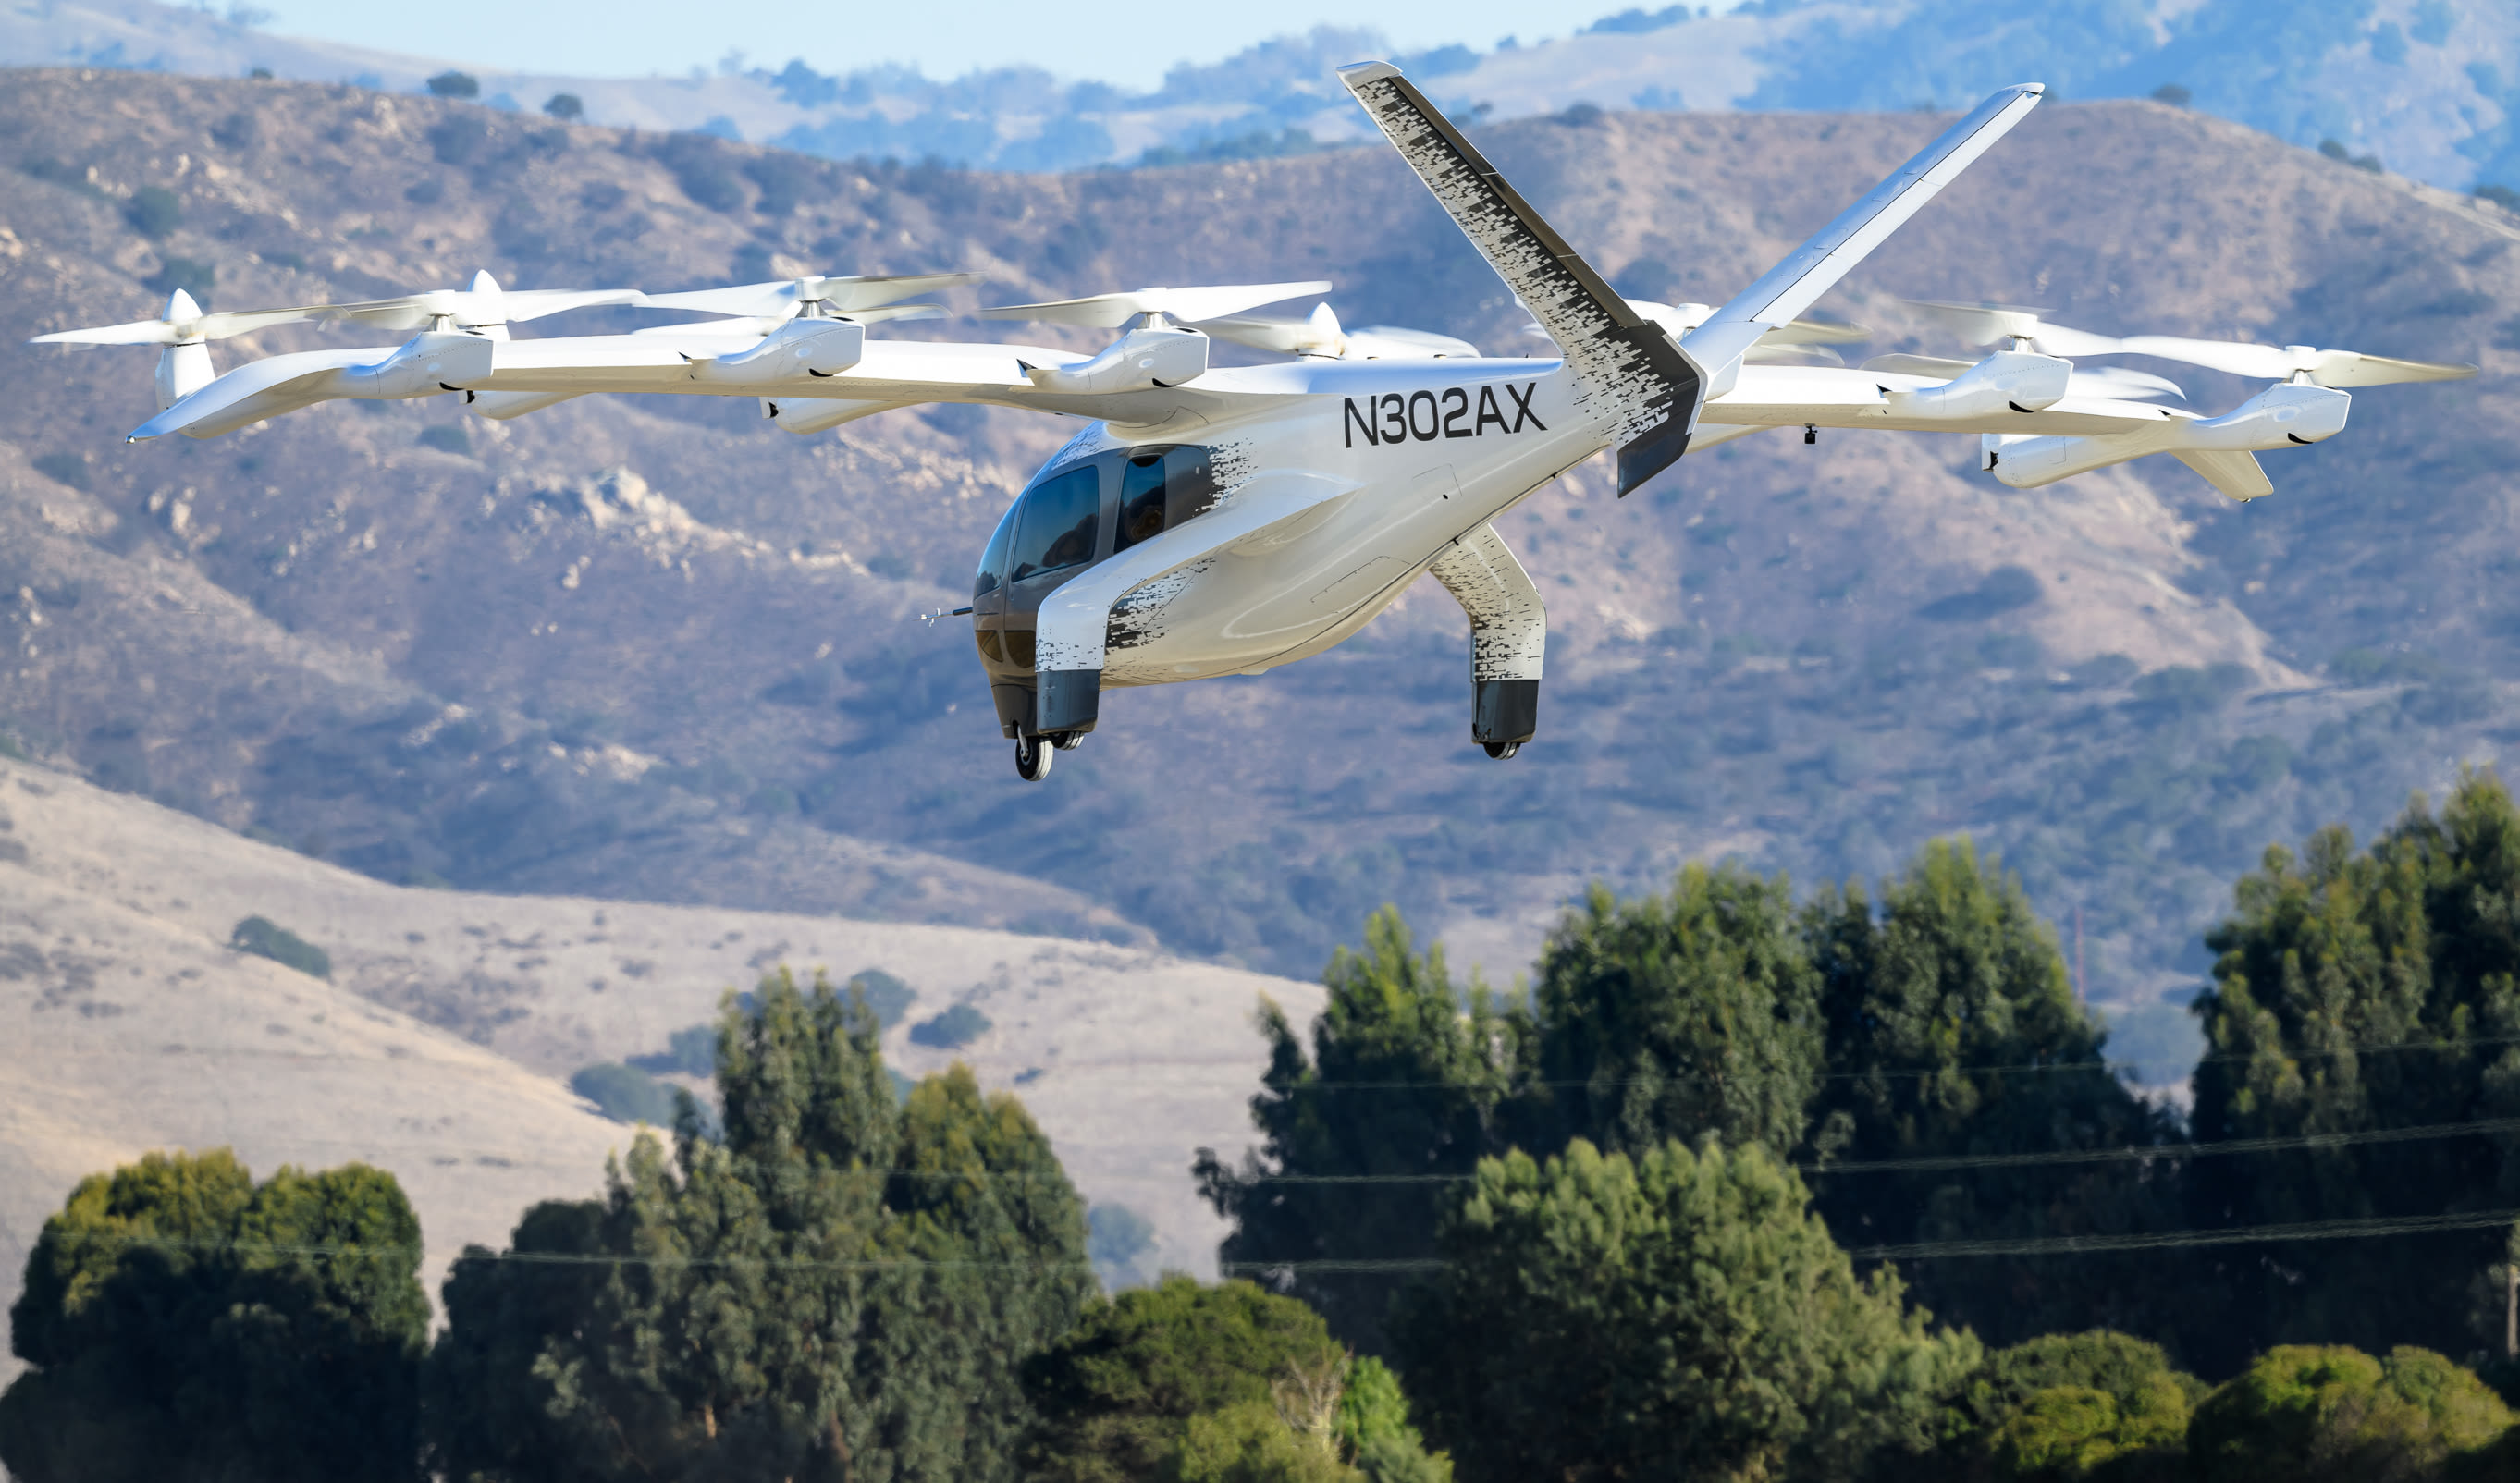 Flying taxis could be reality in California